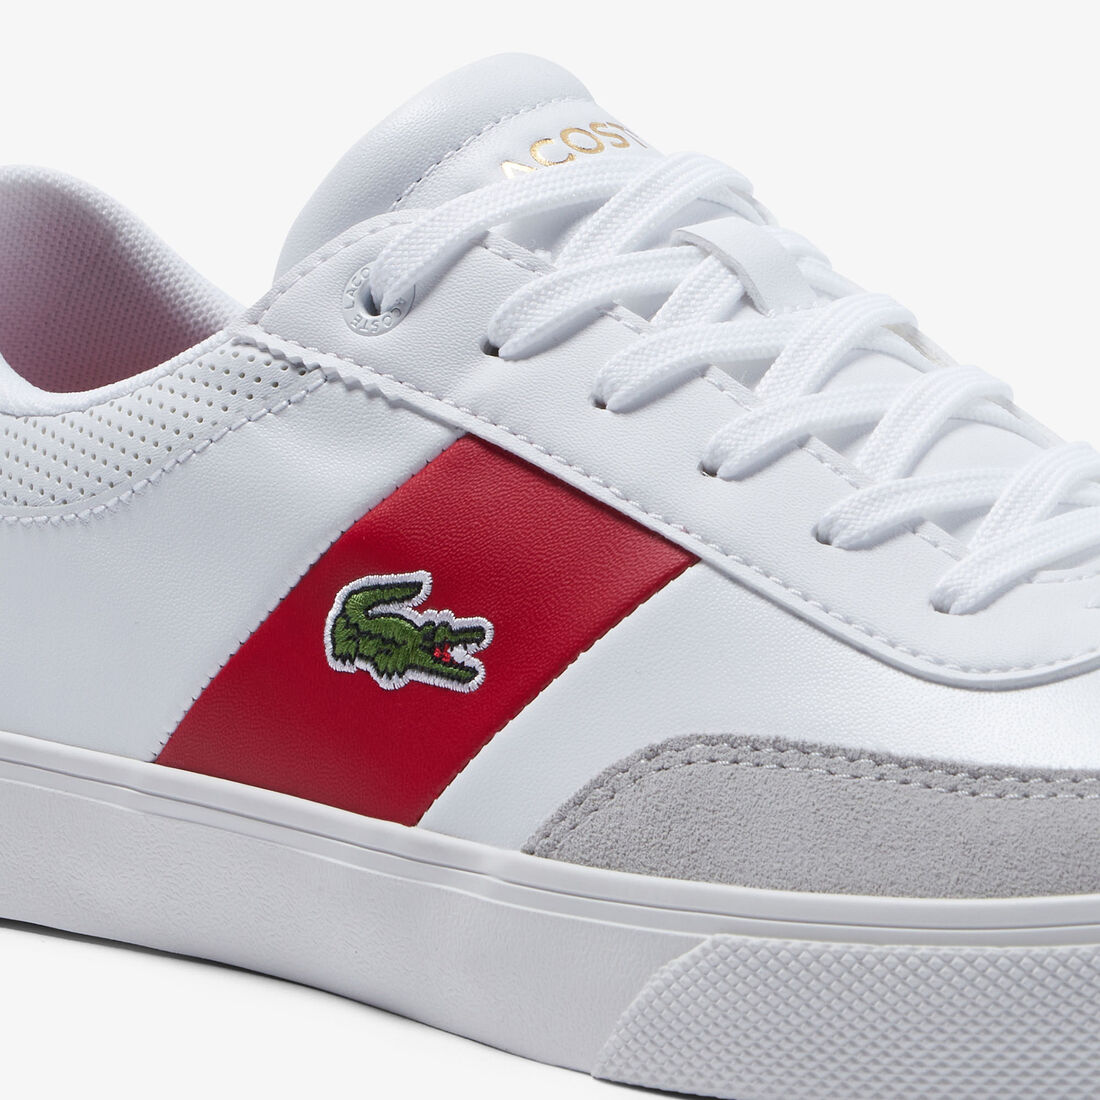 Buy Men's Lacoste Court-Master Pro Leather Sneakers | Lacoste UAE